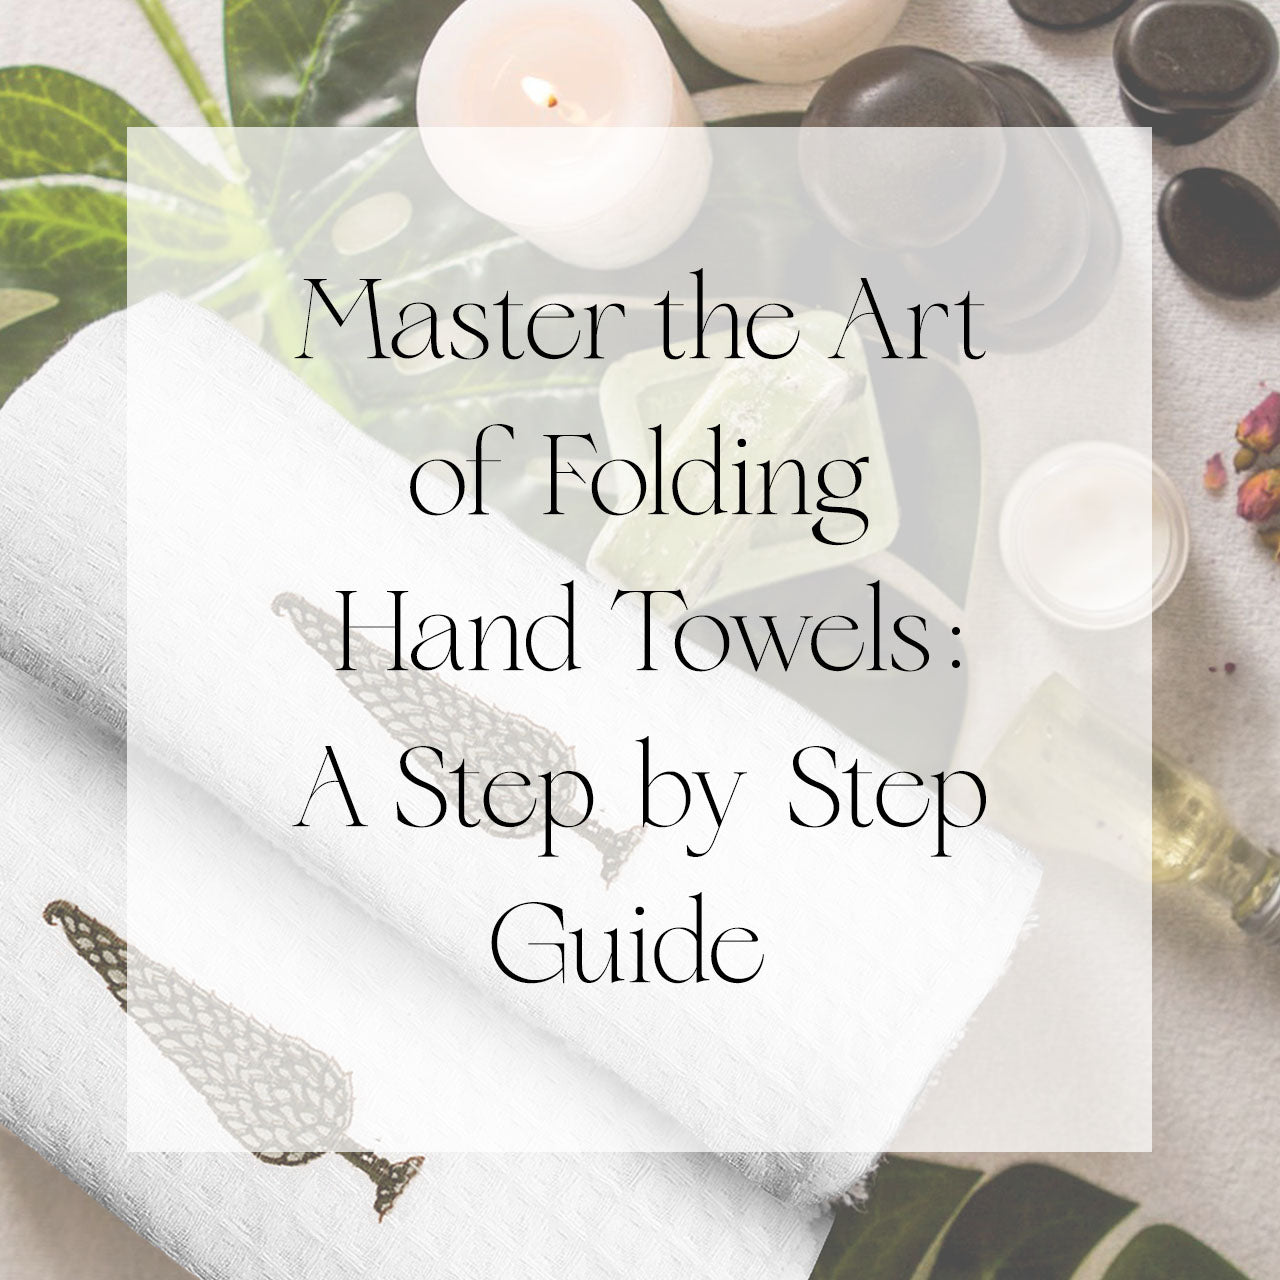 Master the Art of Folding Hand Towels: A Step-by-Step Guide